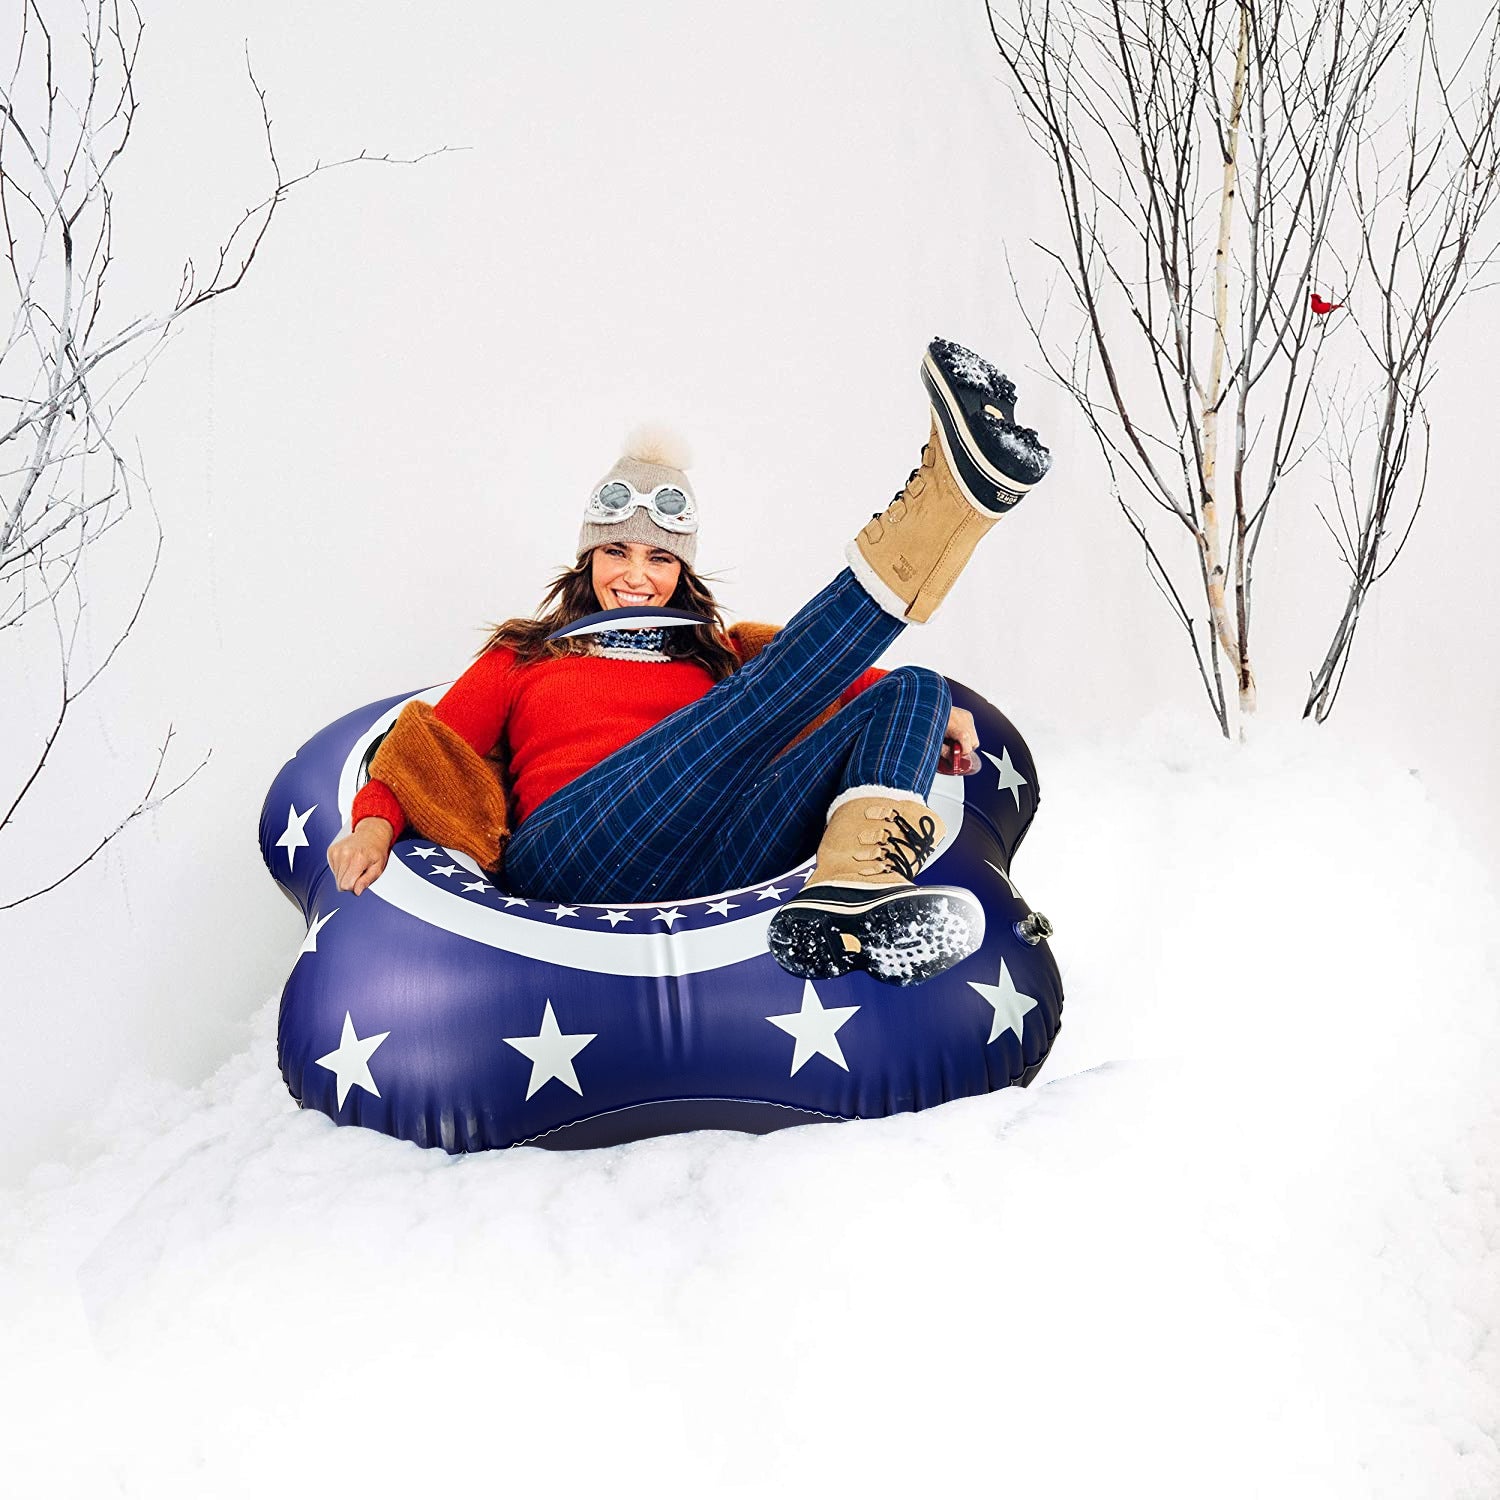 MARKERWAY Snow Tube Inflatable Snow Sled